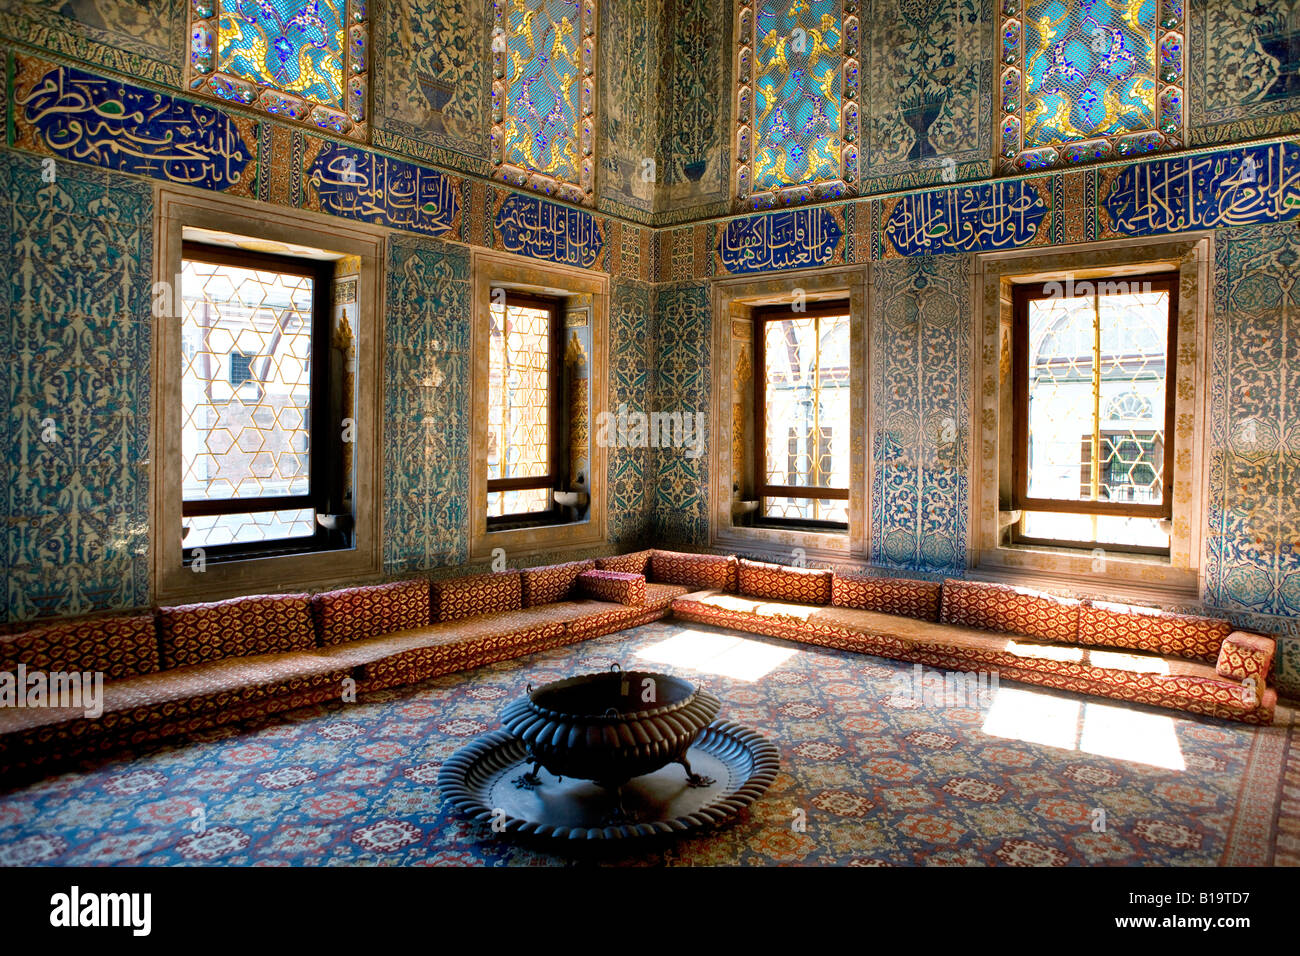 Sultan apartments in Topkapi palace at Istanbul Stock Photo